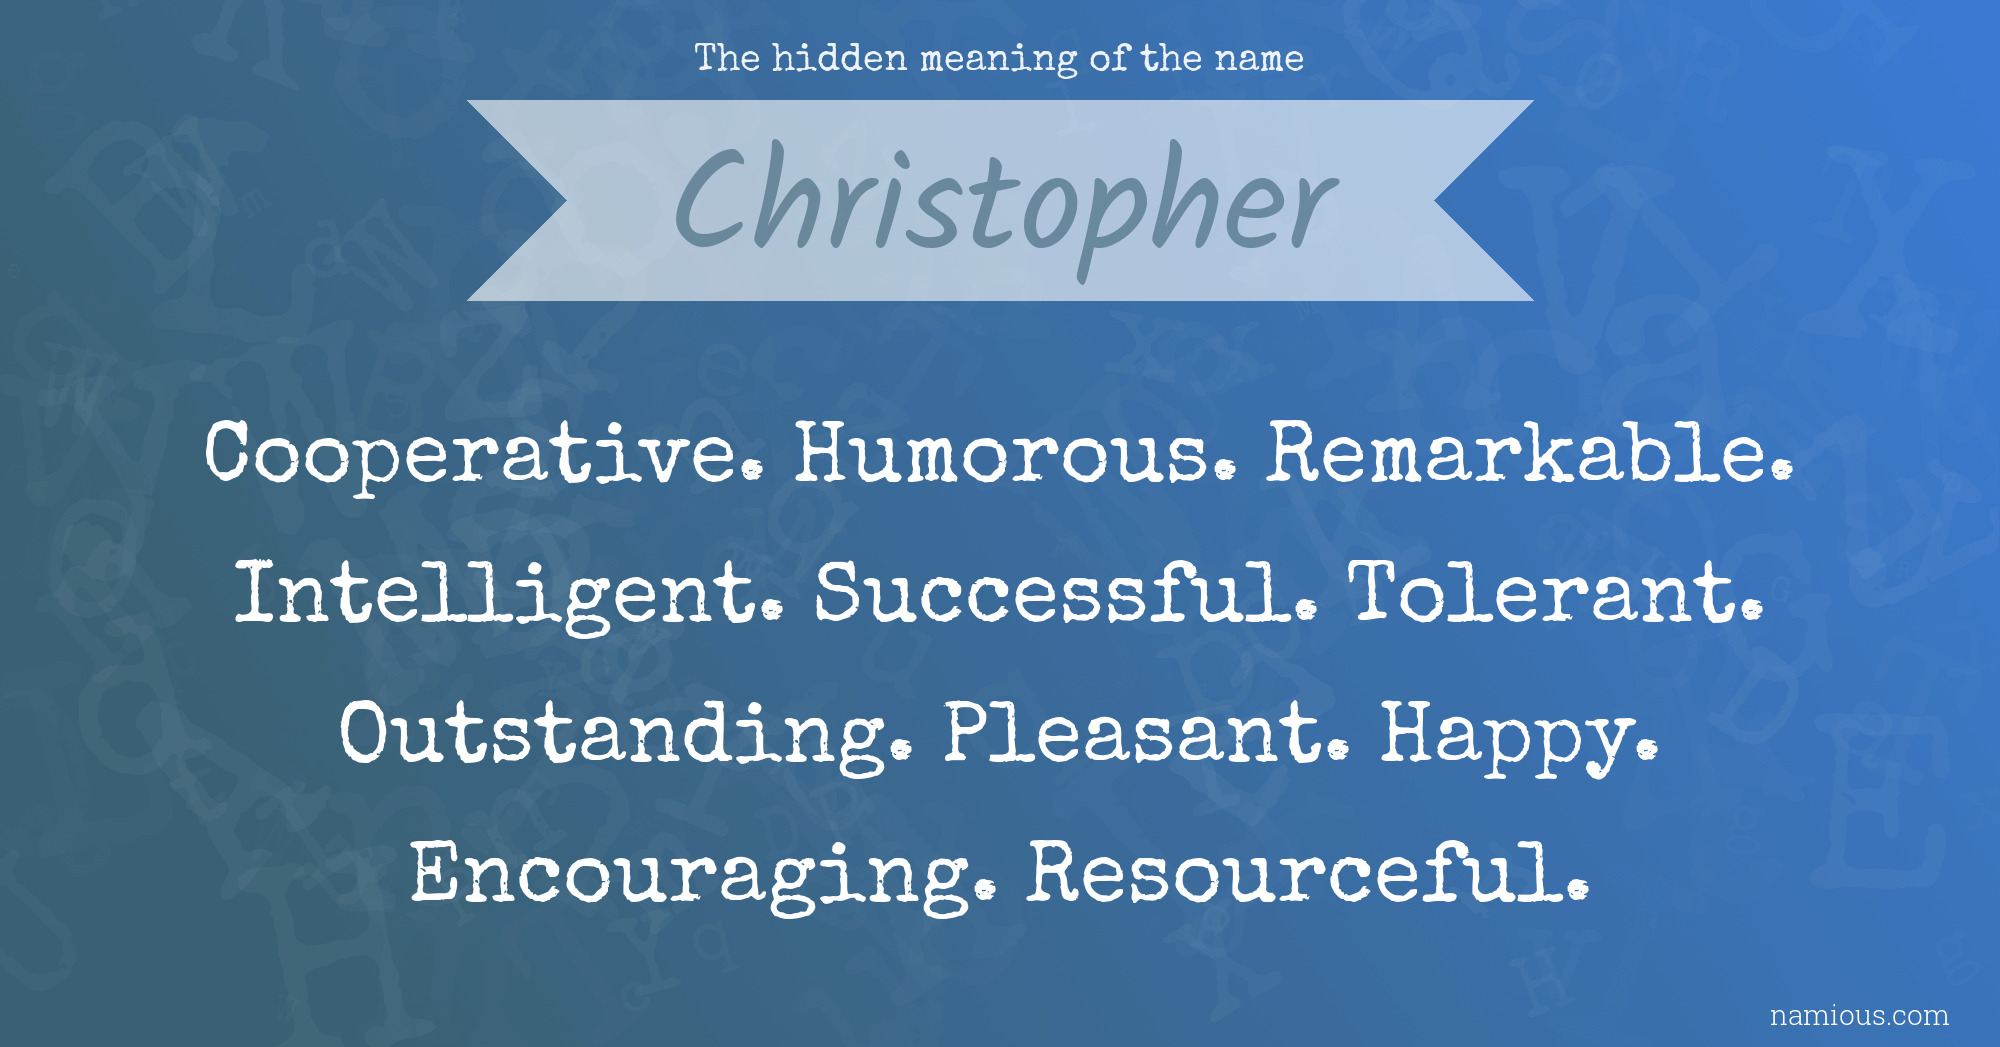 The hidden meaning of the name Christopher